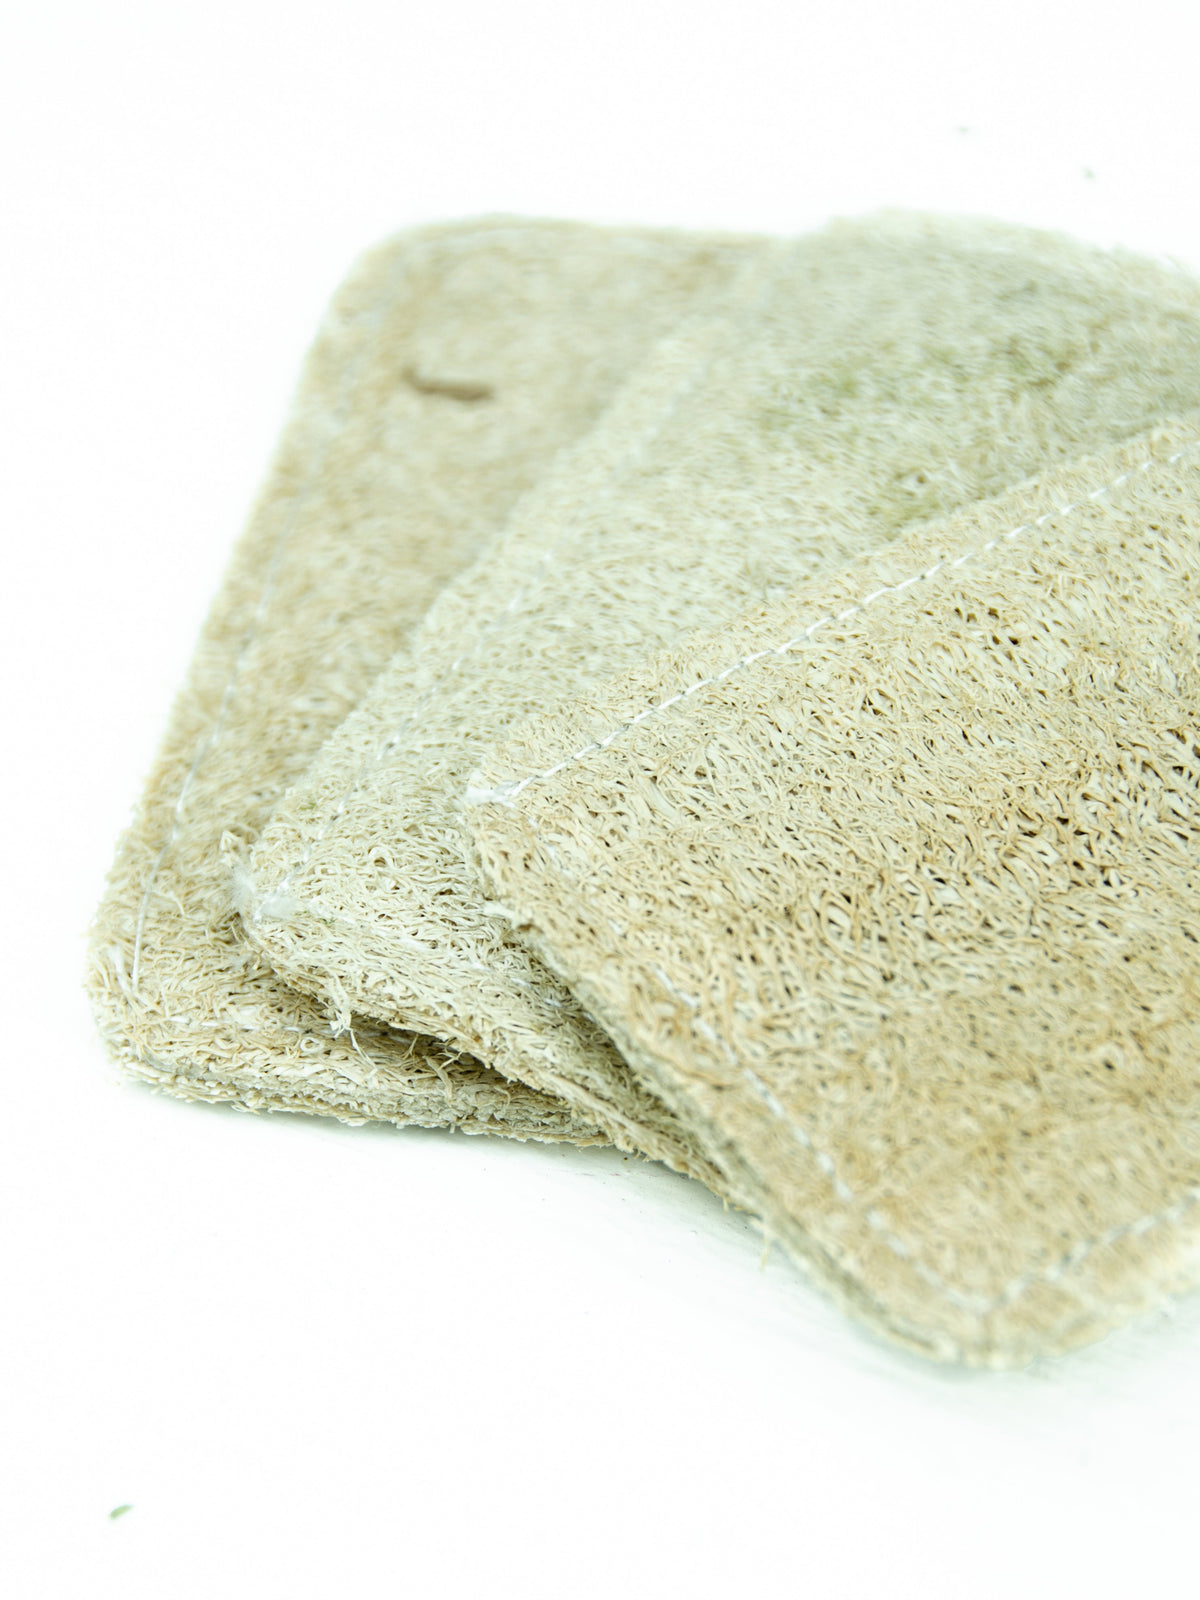 3 Pack Eco Dish Sponges, eco-friednly loofa sponges, zero waste kitchen, sustainable sponges